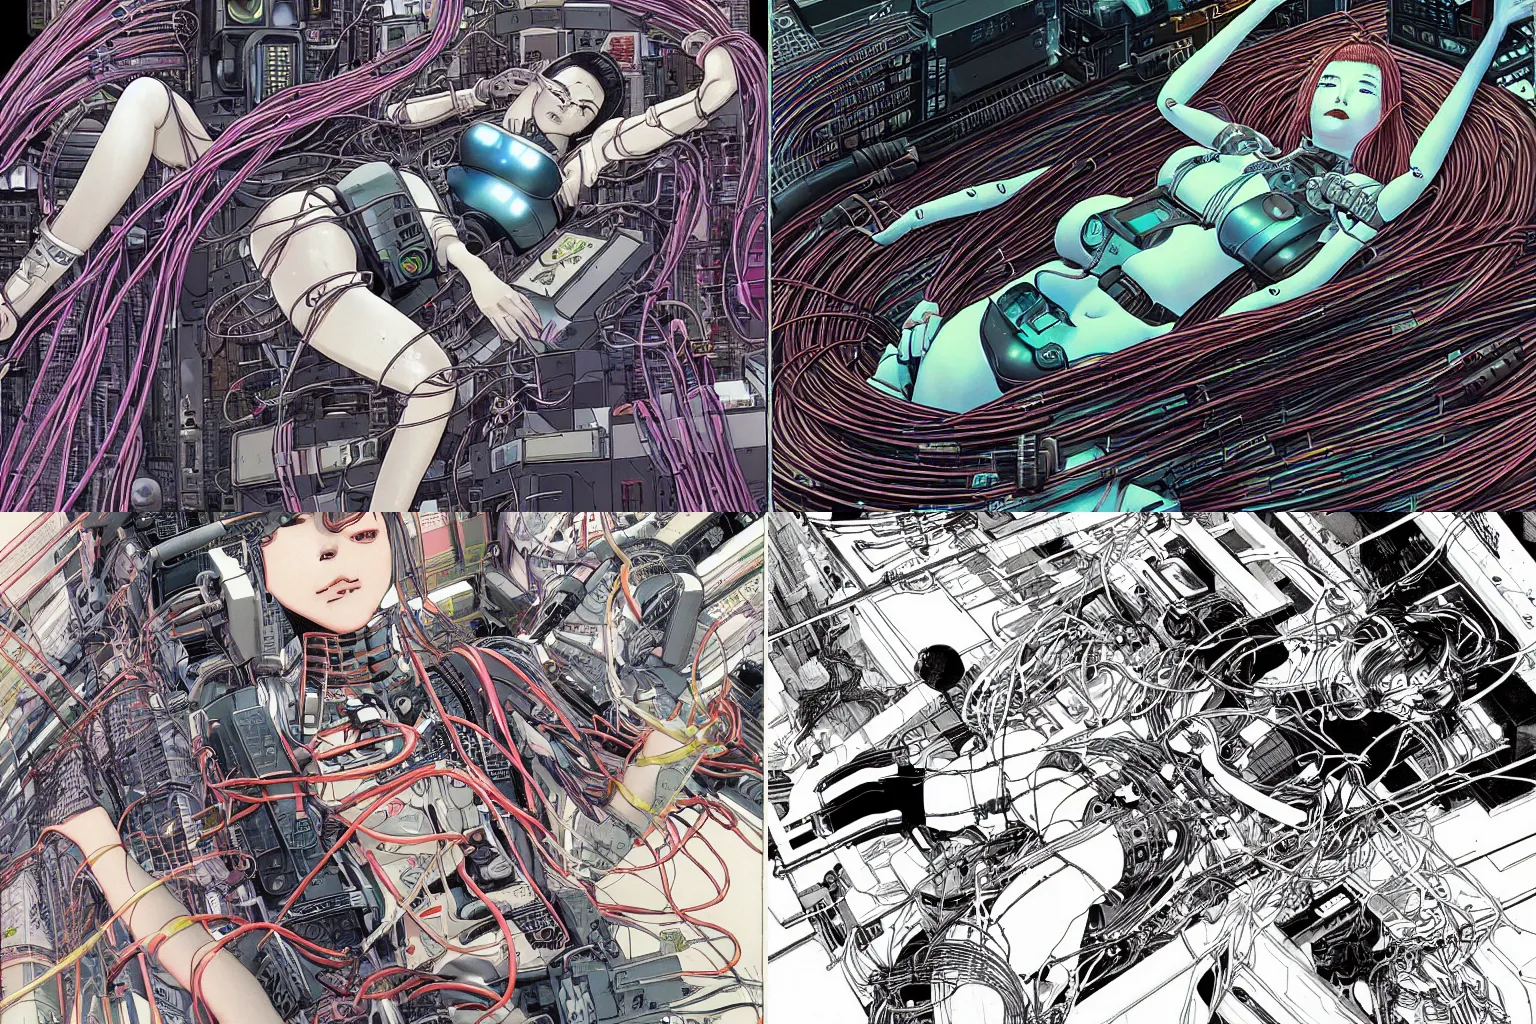 Prompt: an intricate, awe inspiring cyberpunk illustration of a female android body lying open on a labor floor, wires and cables coming out, by masamune shirow and katsuhiro otomo ((colorful))